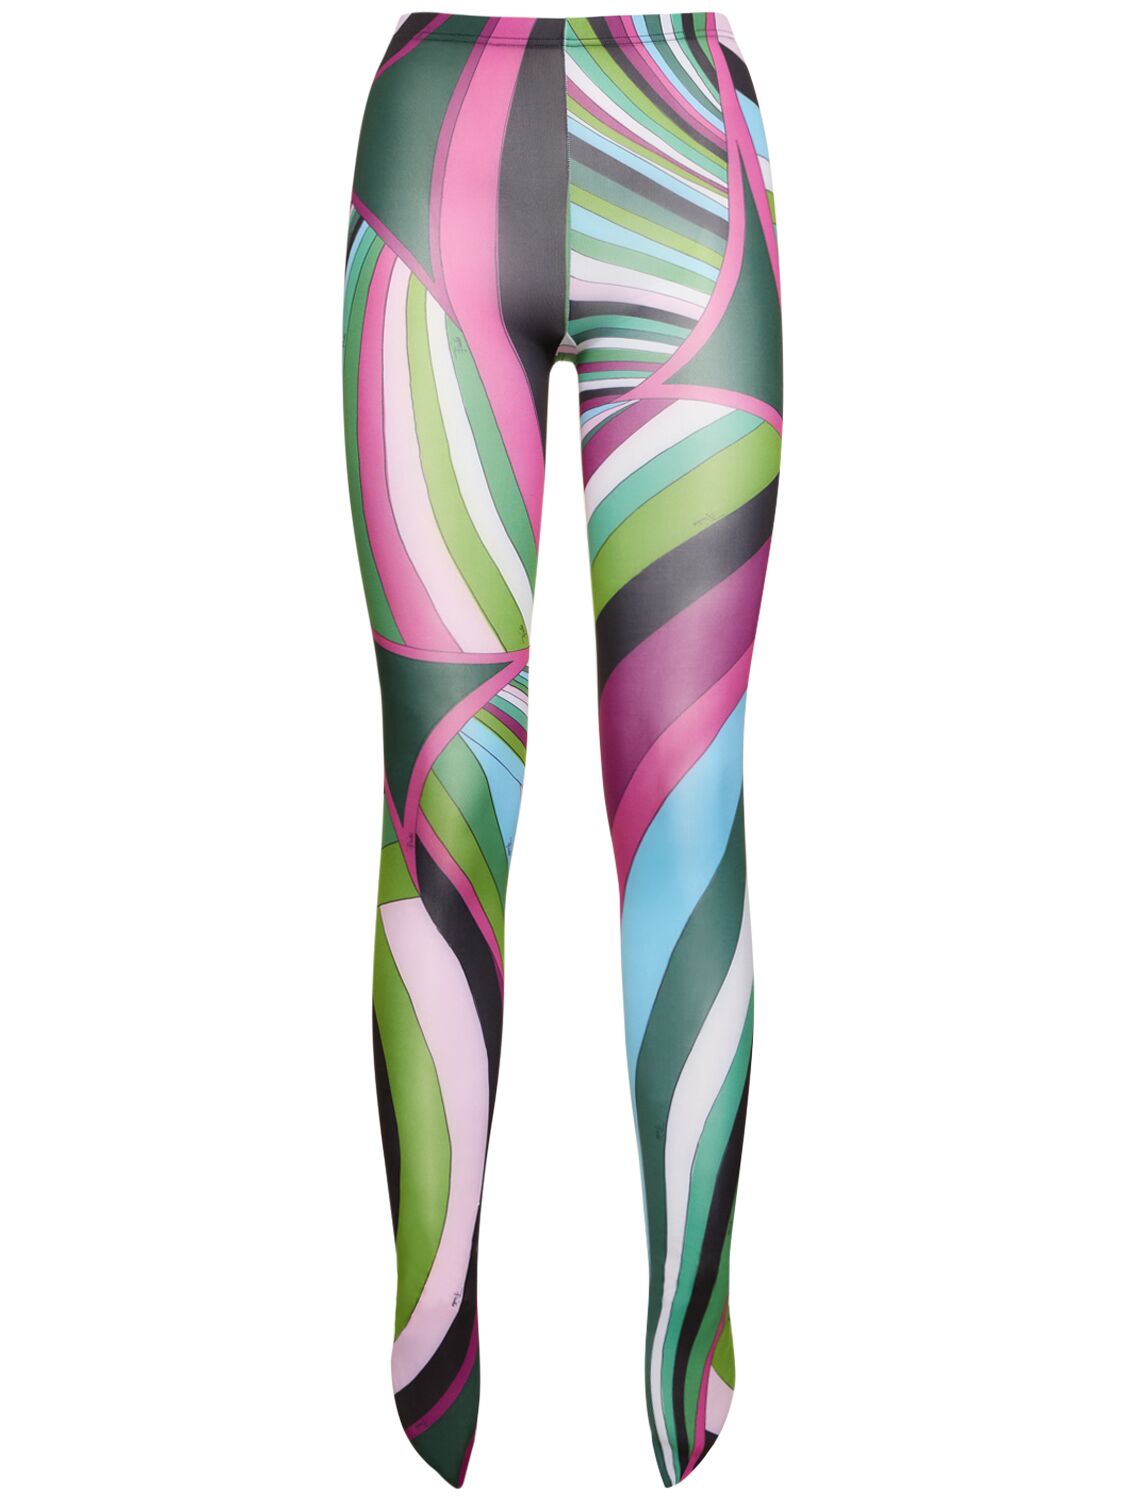 PUCCI Printed Jersey Leggings W/ Feet for Women